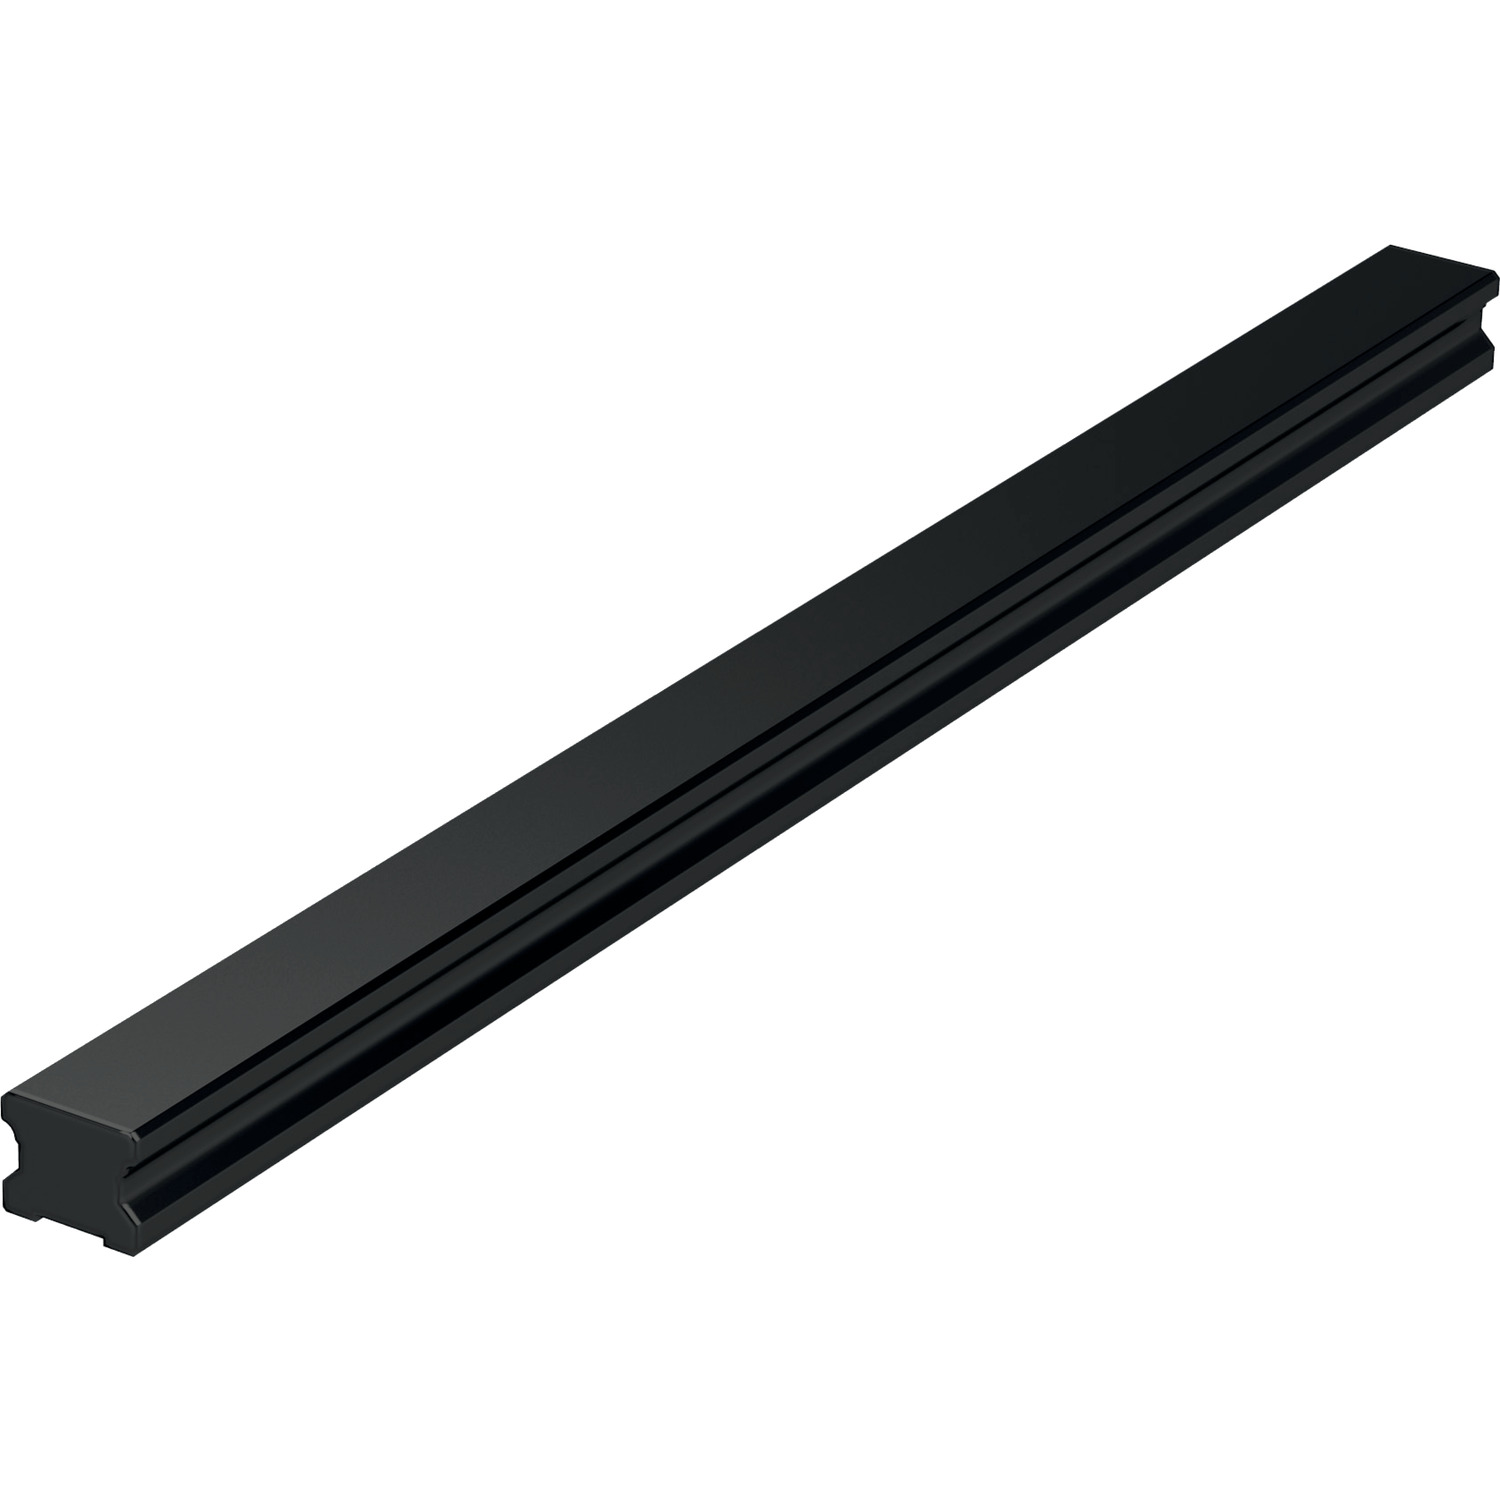 Product L1016.BR, 25mm Linear Guide Rail rear fixing, blackened / 